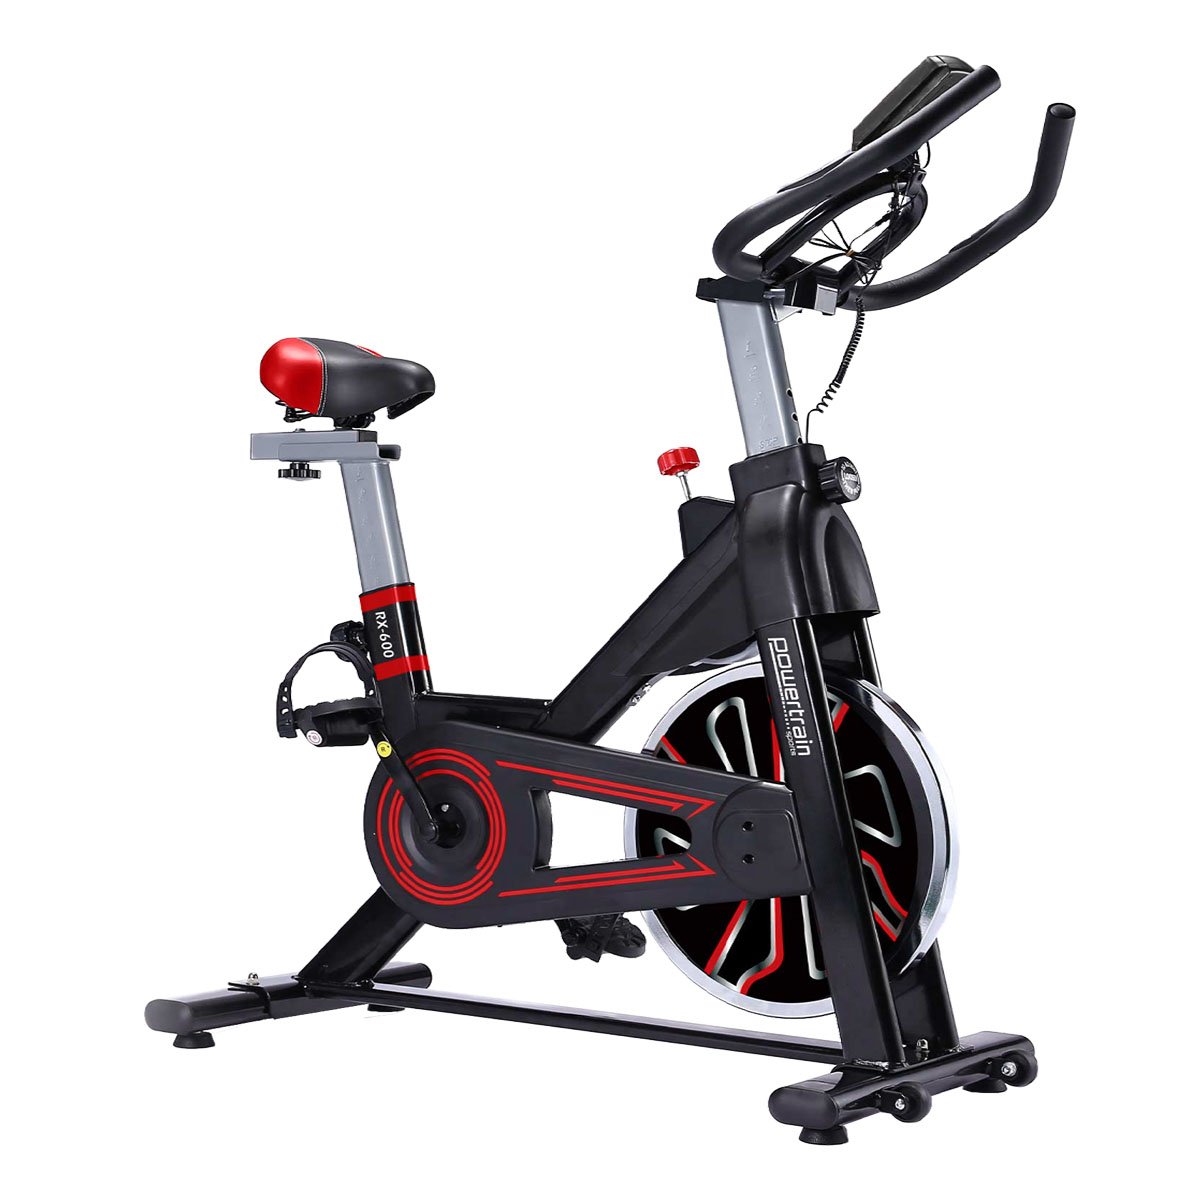 Powertrain RX-600 Exercise Spin Bike Cardio Cycle - Red-Sports &amp; Fitness &gt; Bikes &amp; Accessories-PEROZ Accessories